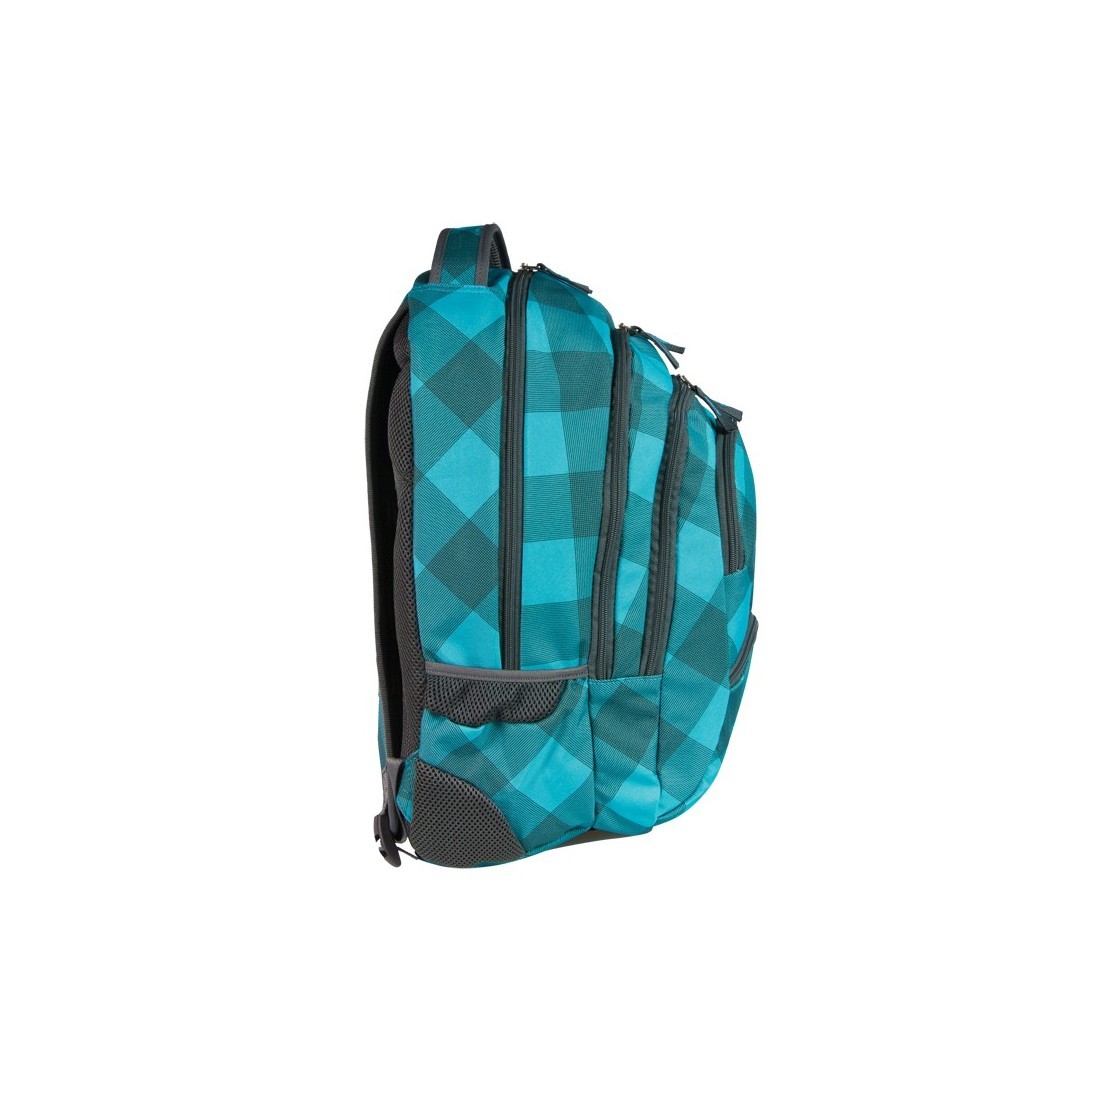 PLECAK MŁODZIEŻOWY COOLPACK COLLEGE TURQUISE CP 021 - plecak-tornister.pl